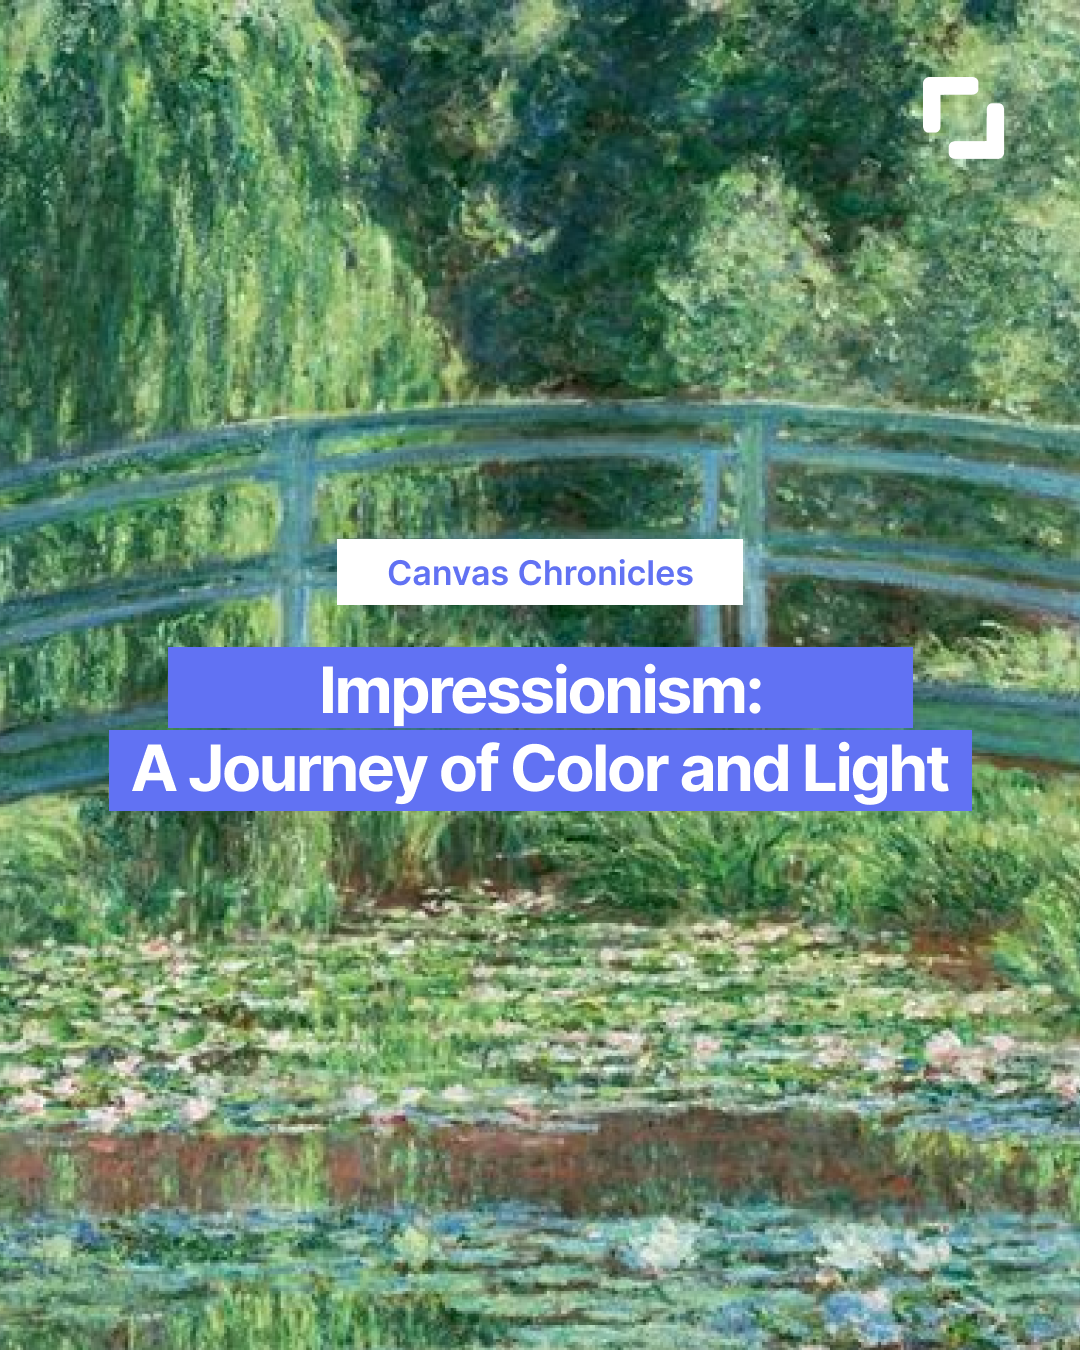 Impressionism: A Journey of Color and Light